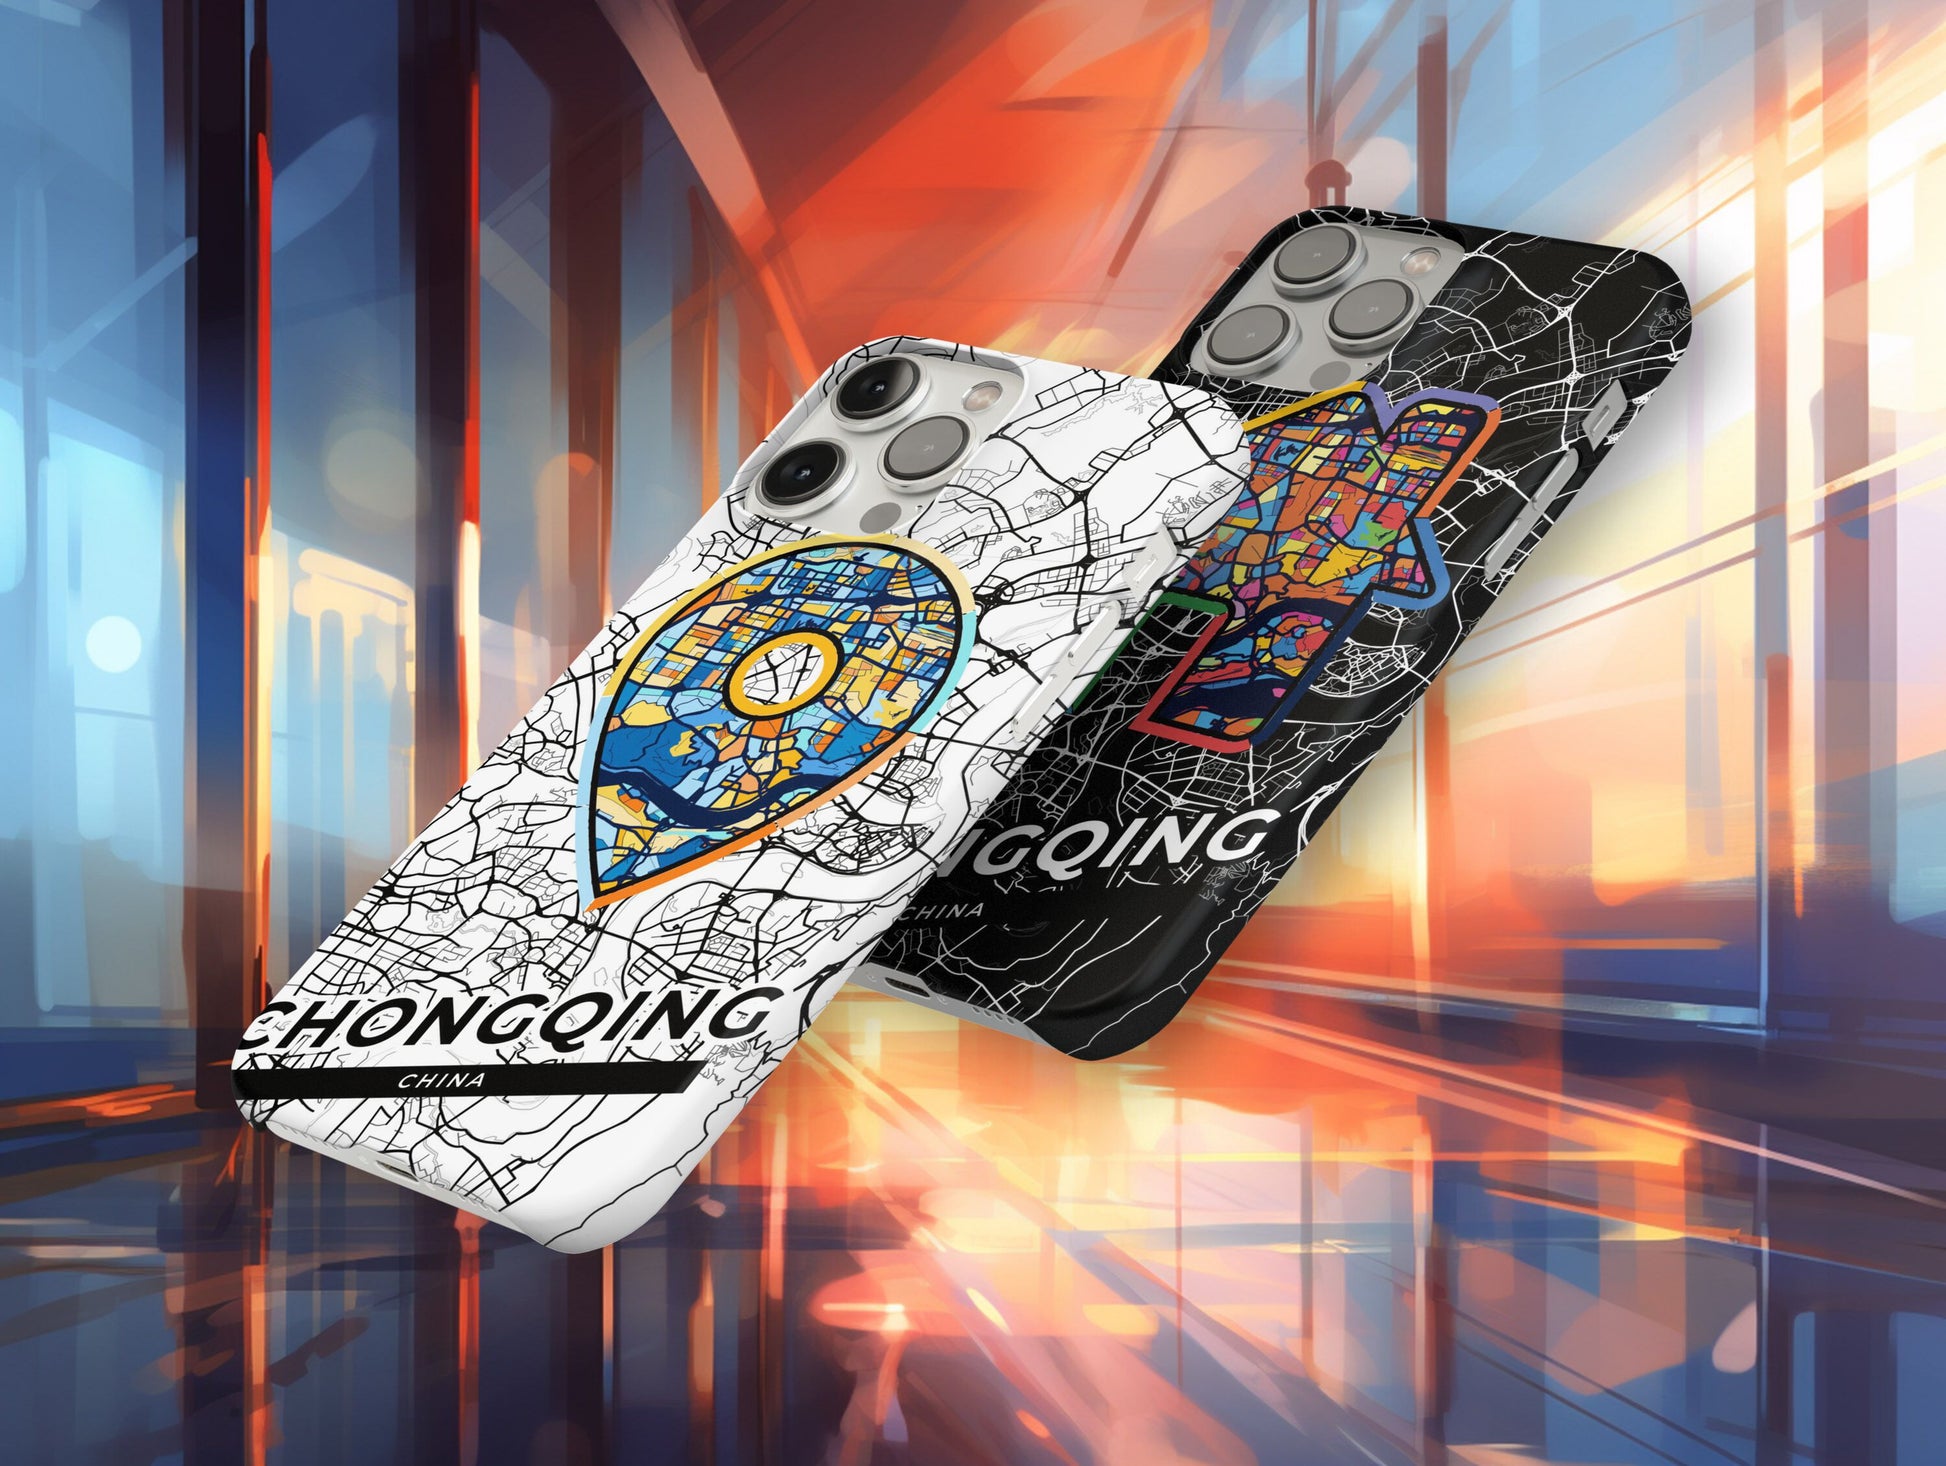 Chongqing China slim phone case with colorful icon. Birthday, wedding or housewarming gift. Couple match cases.